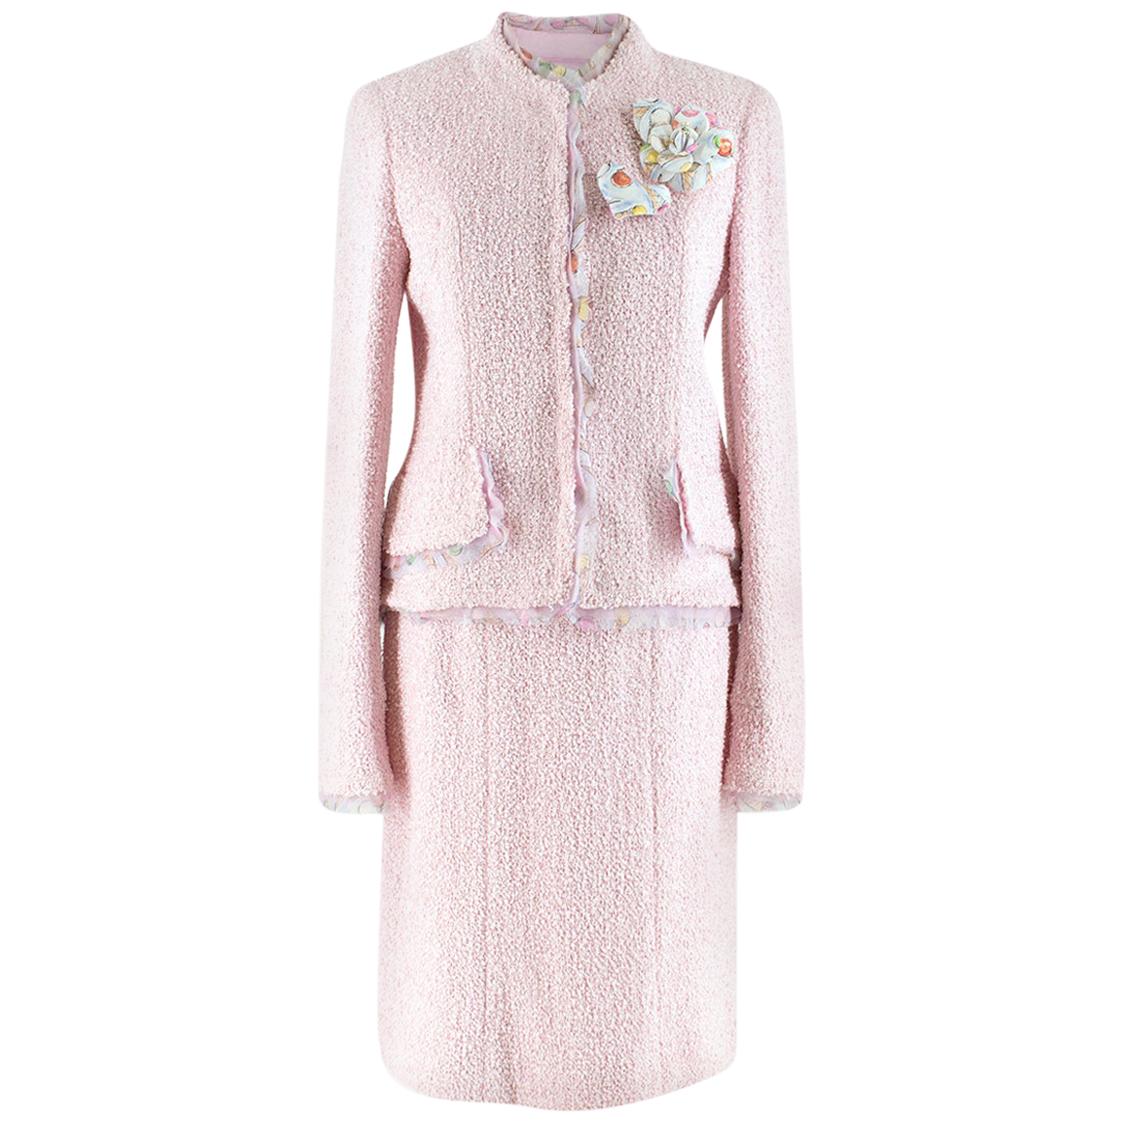 Sold at Auction: A Chanel pink and white cotton tweed dress, 2000s